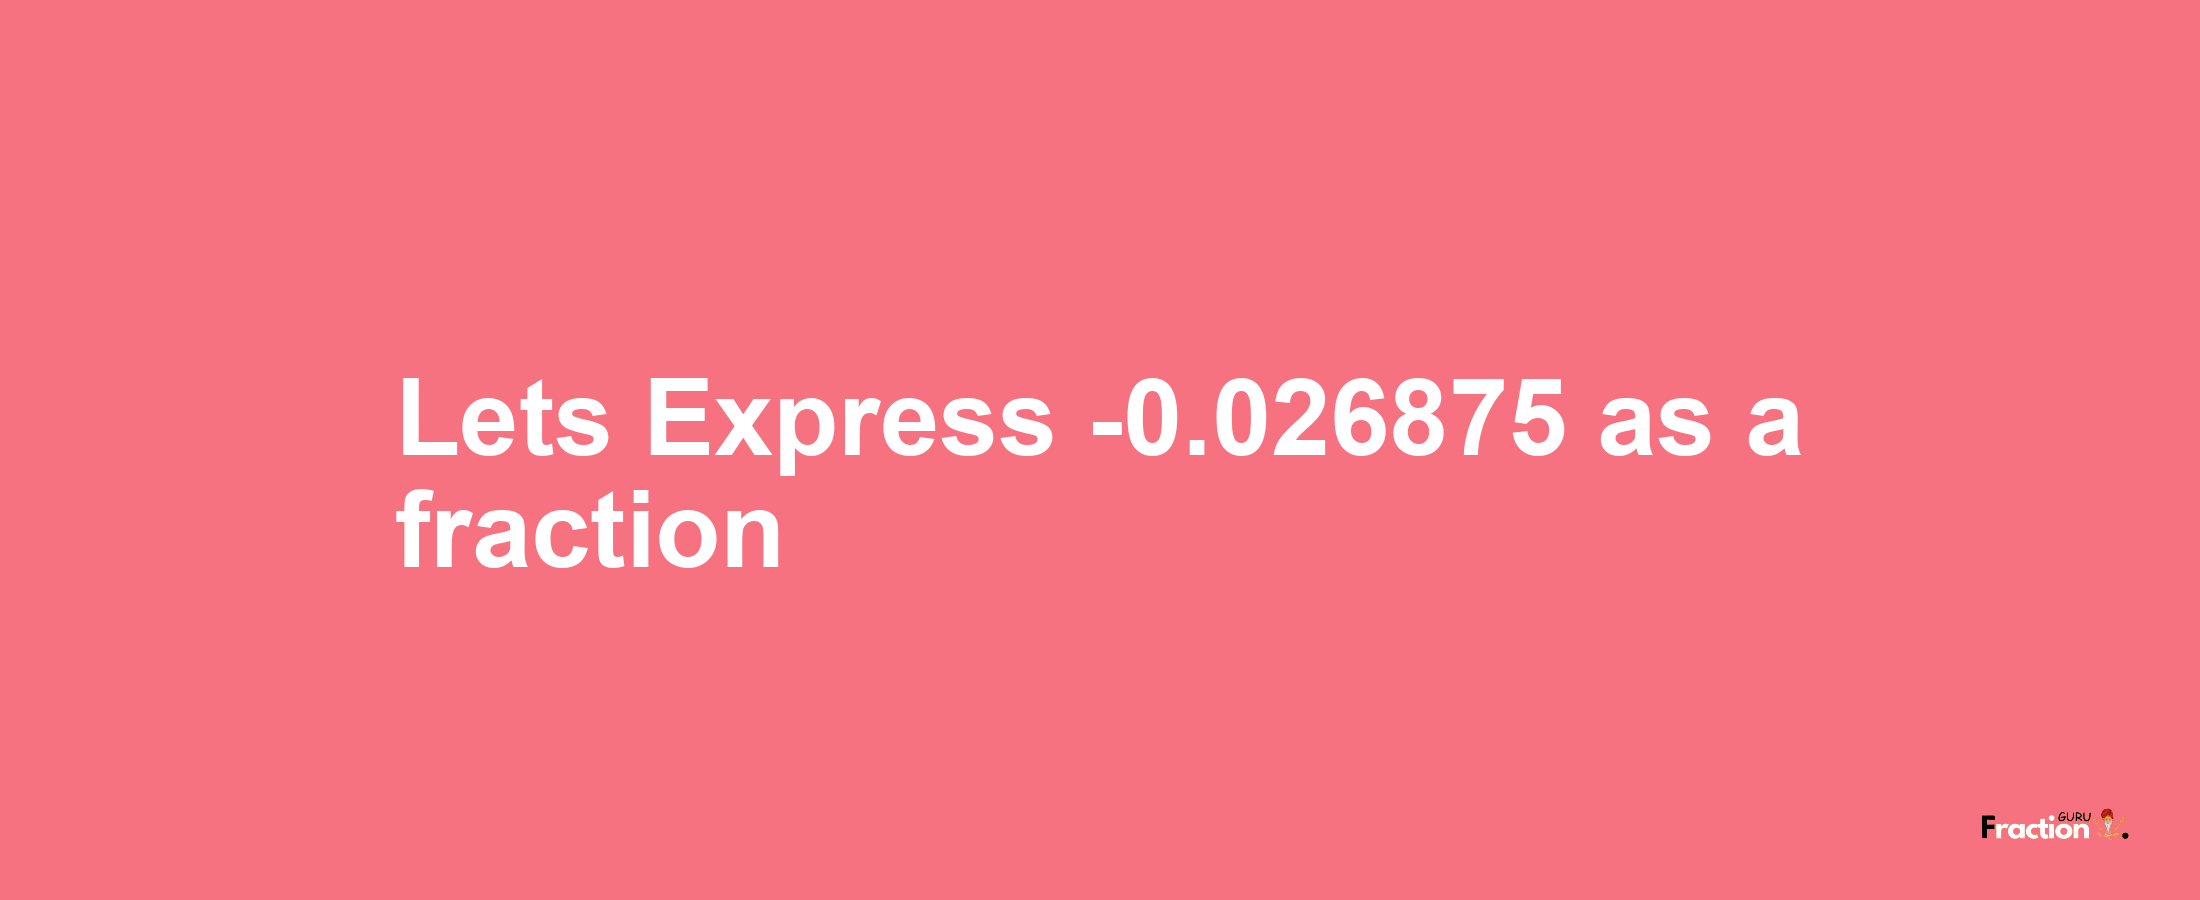 Lets Express -0.026875 as afraction